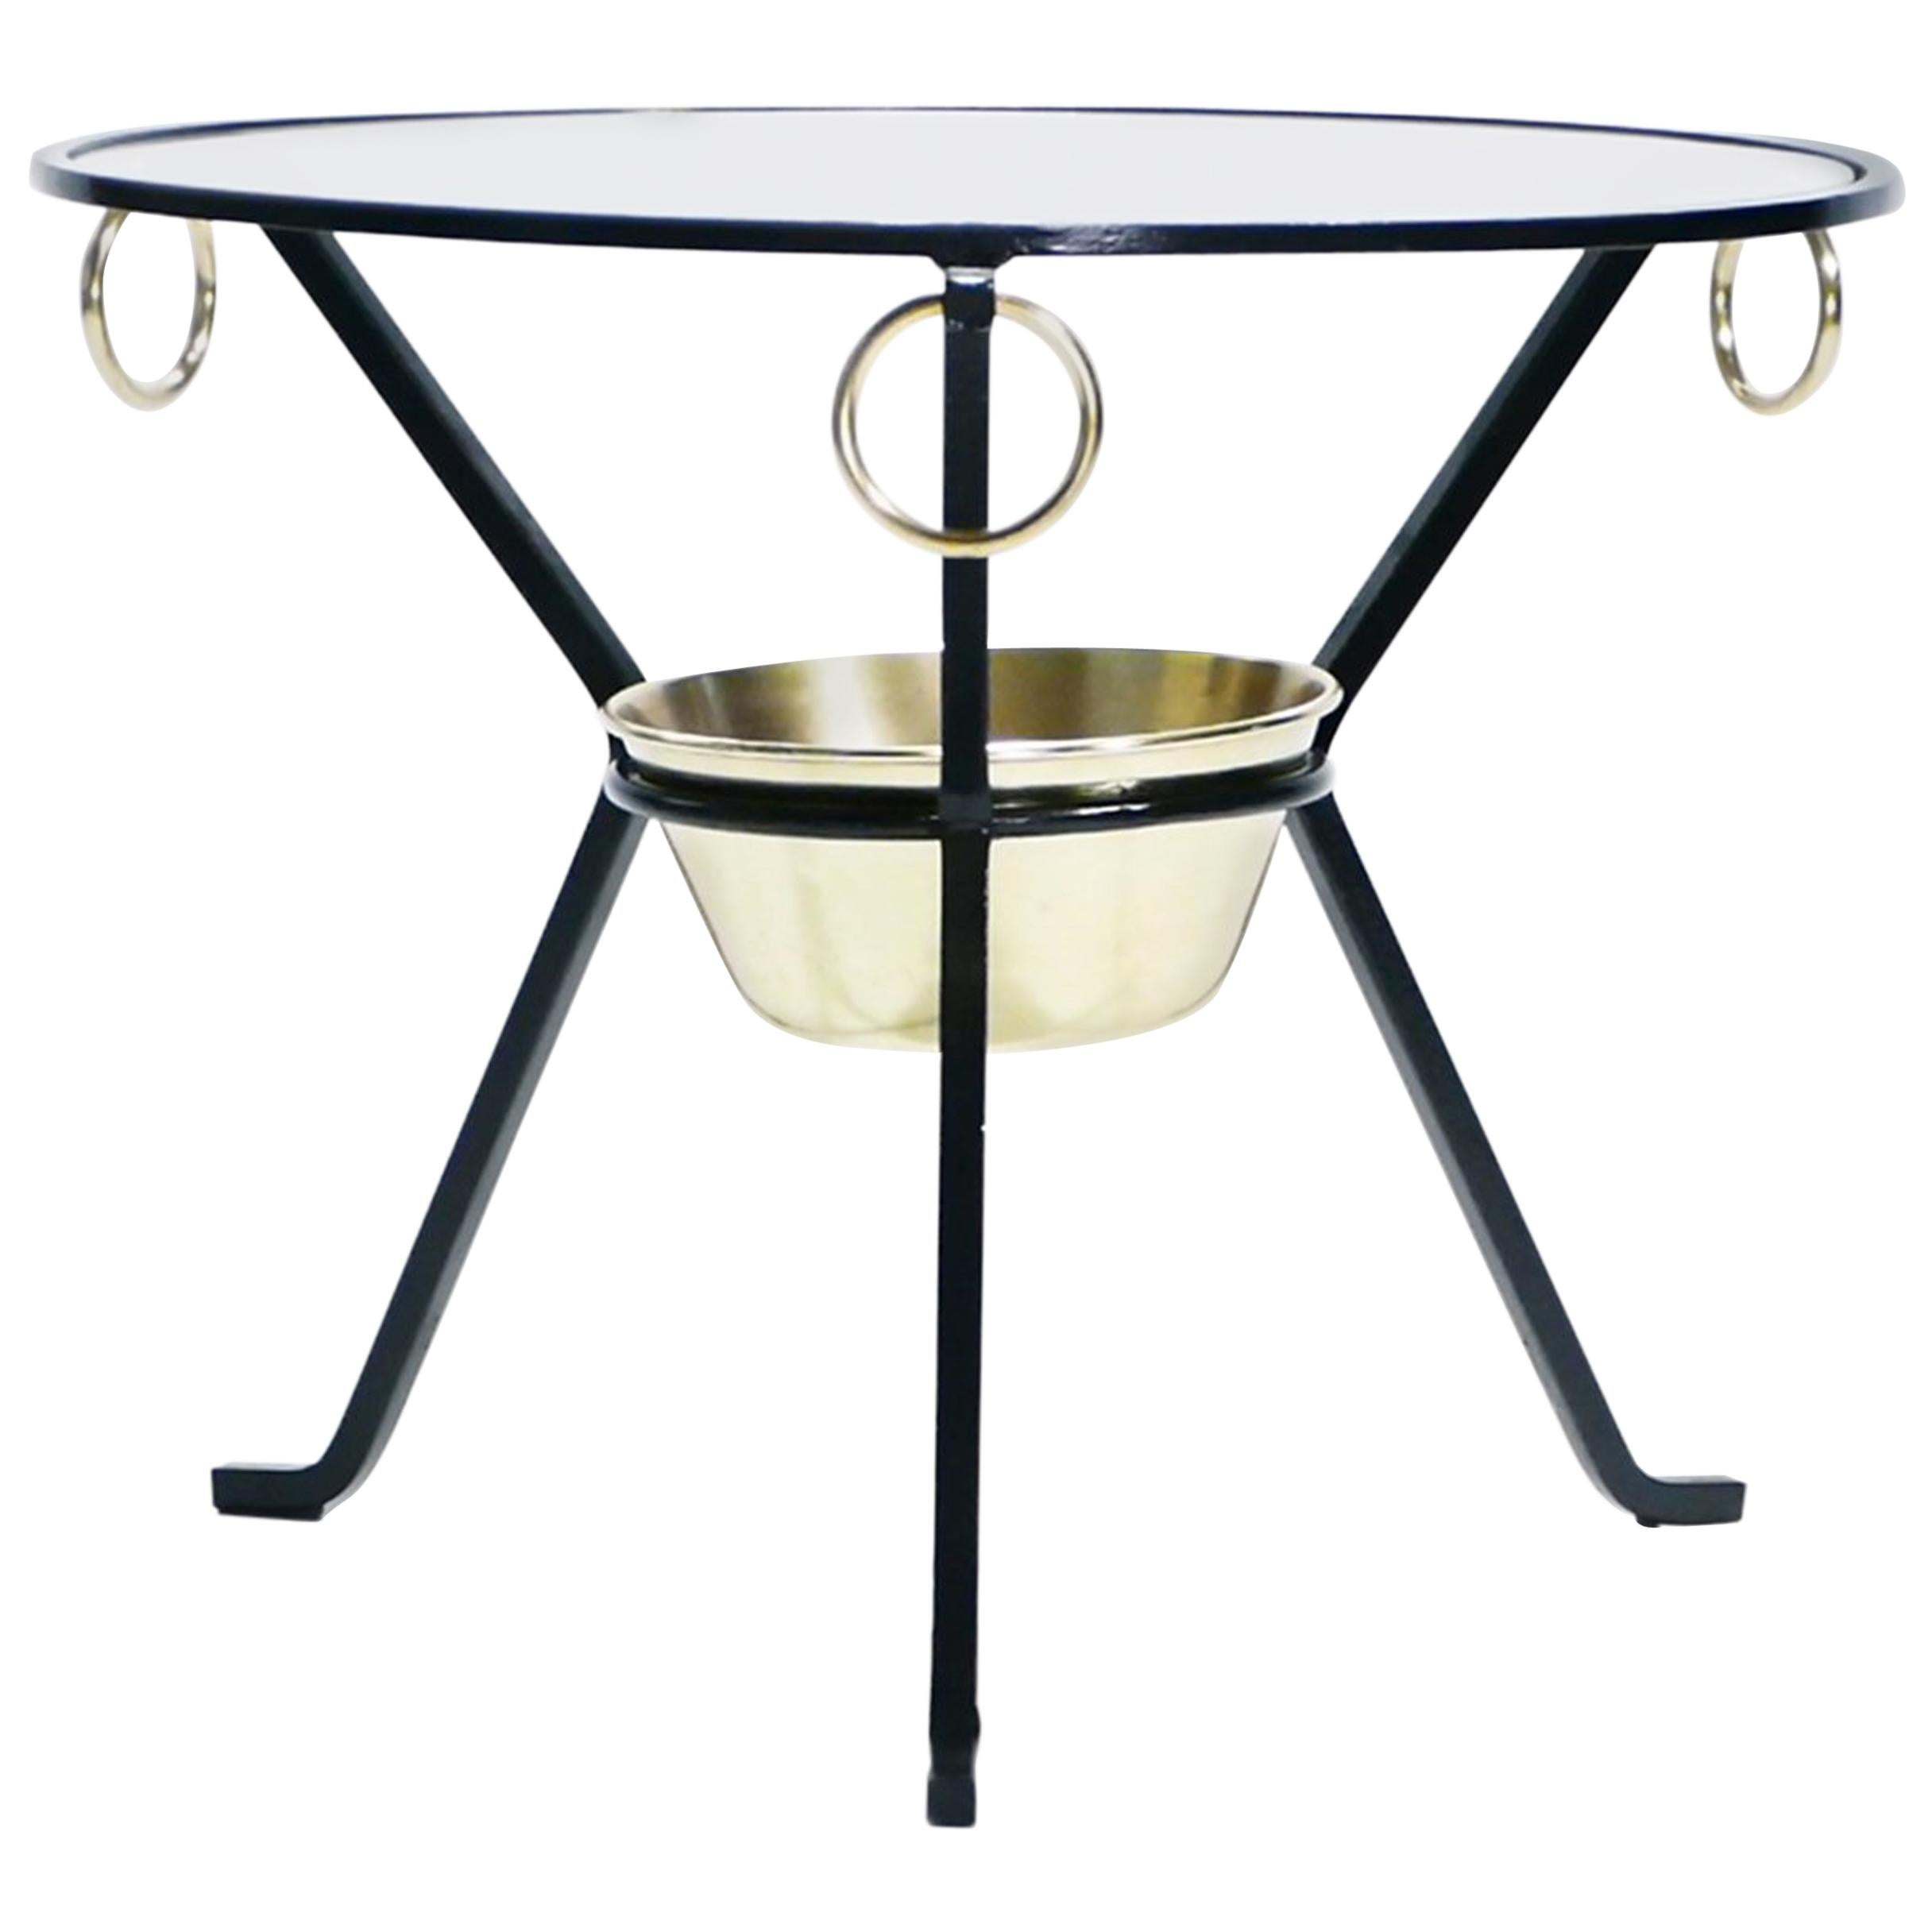 A sophisticated blend of Mid-Century Modern and neoclassical design, this 1950s side table or gueridon by Jacques Adnet features bold brass details, matte black metal feet, and a transparent glass top. Triple legs cross gracefully to support the